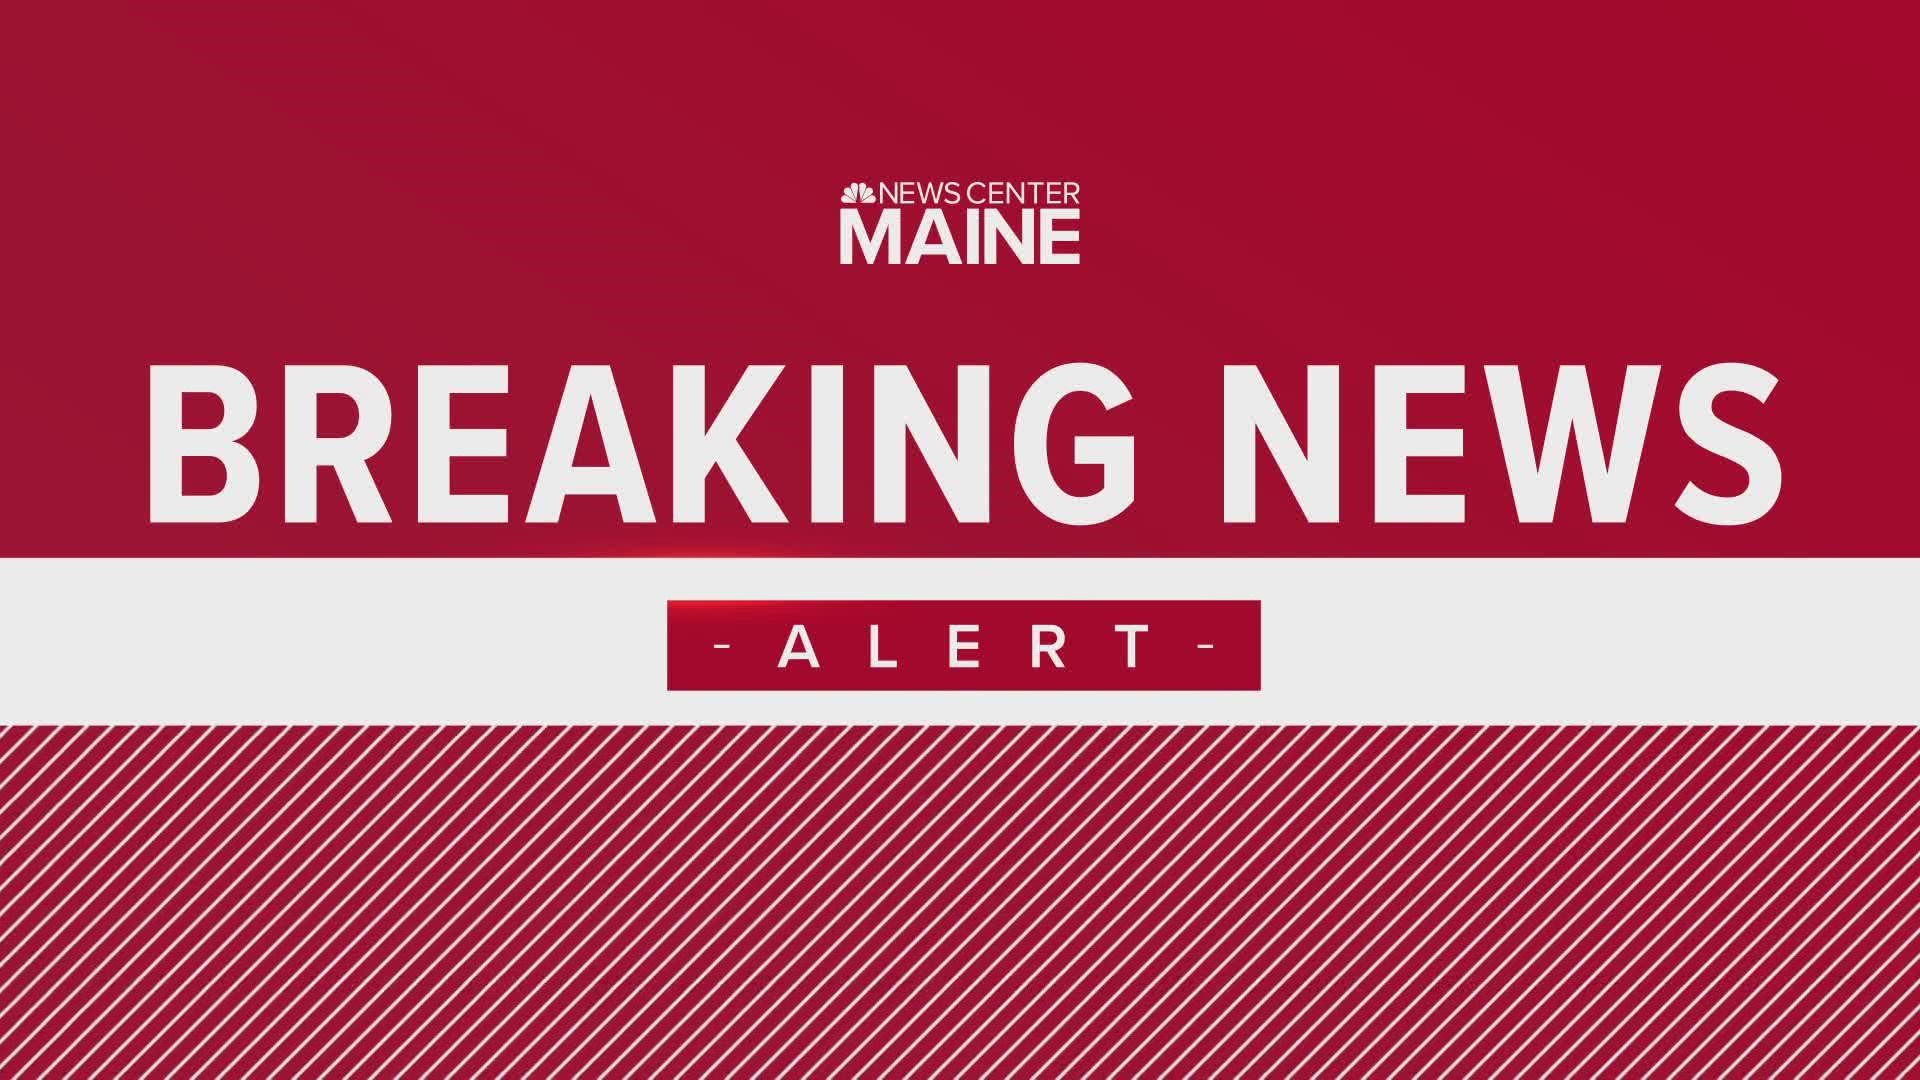 Great Salt Bay Community School in Damariscotta was evacuated Wednesday due to a bomb threat. Damariscotta police said all children are safely accounted for.